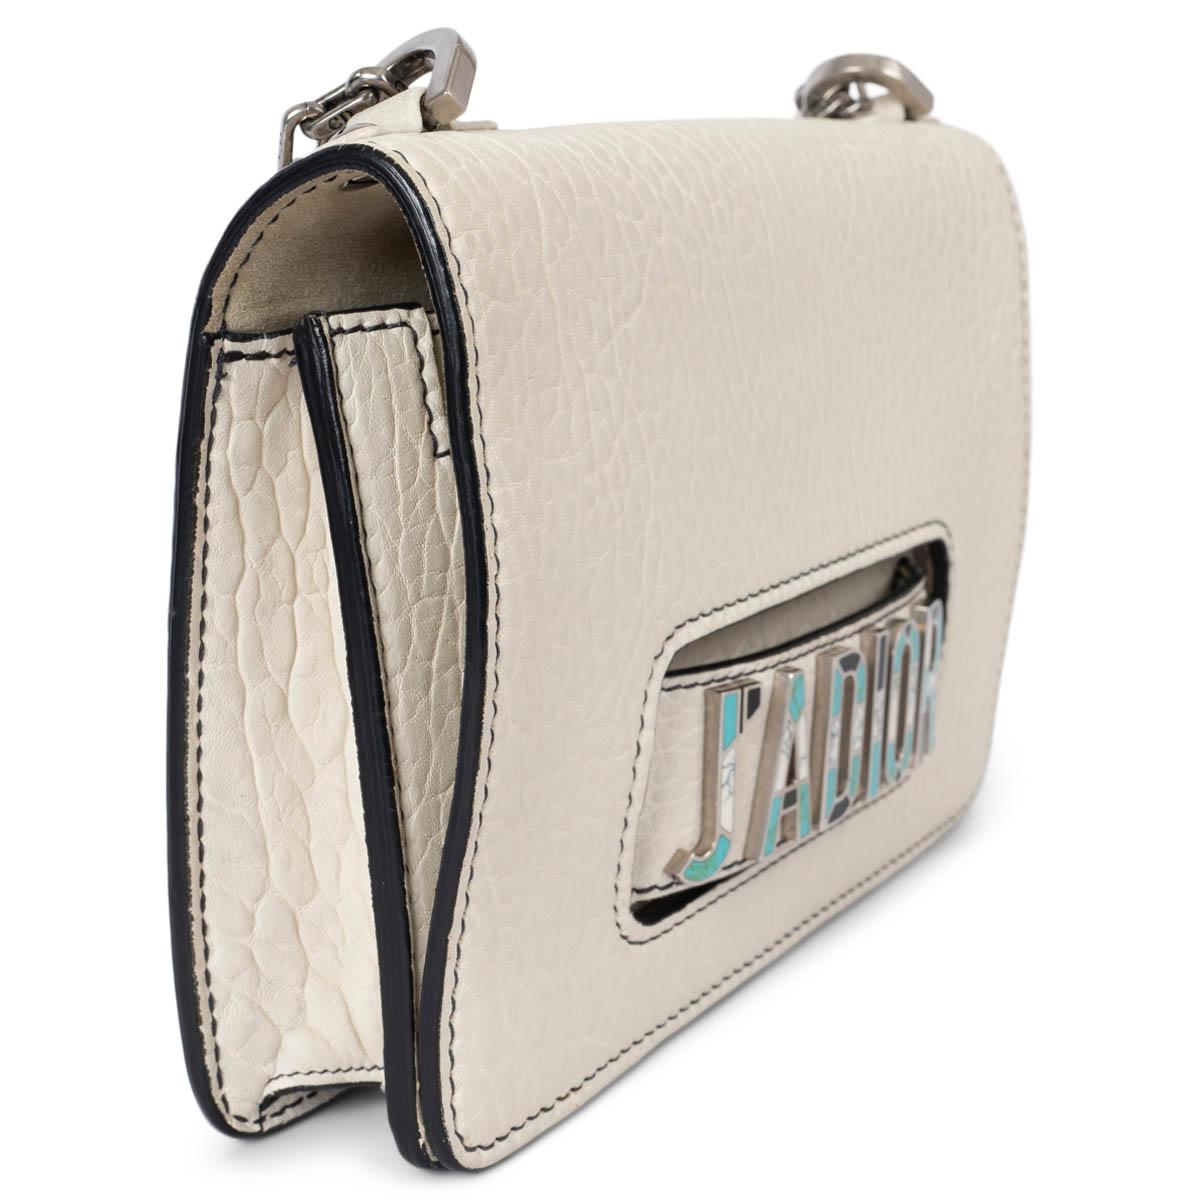 100% authentic Christian Dior J'Adior Small flap shoulder bag in cream Canyon grained lambskin leather. Features a chain strap and Mosaic logo. Features an open pocket on the front and the flap. Lined in leather with two open pockets against the